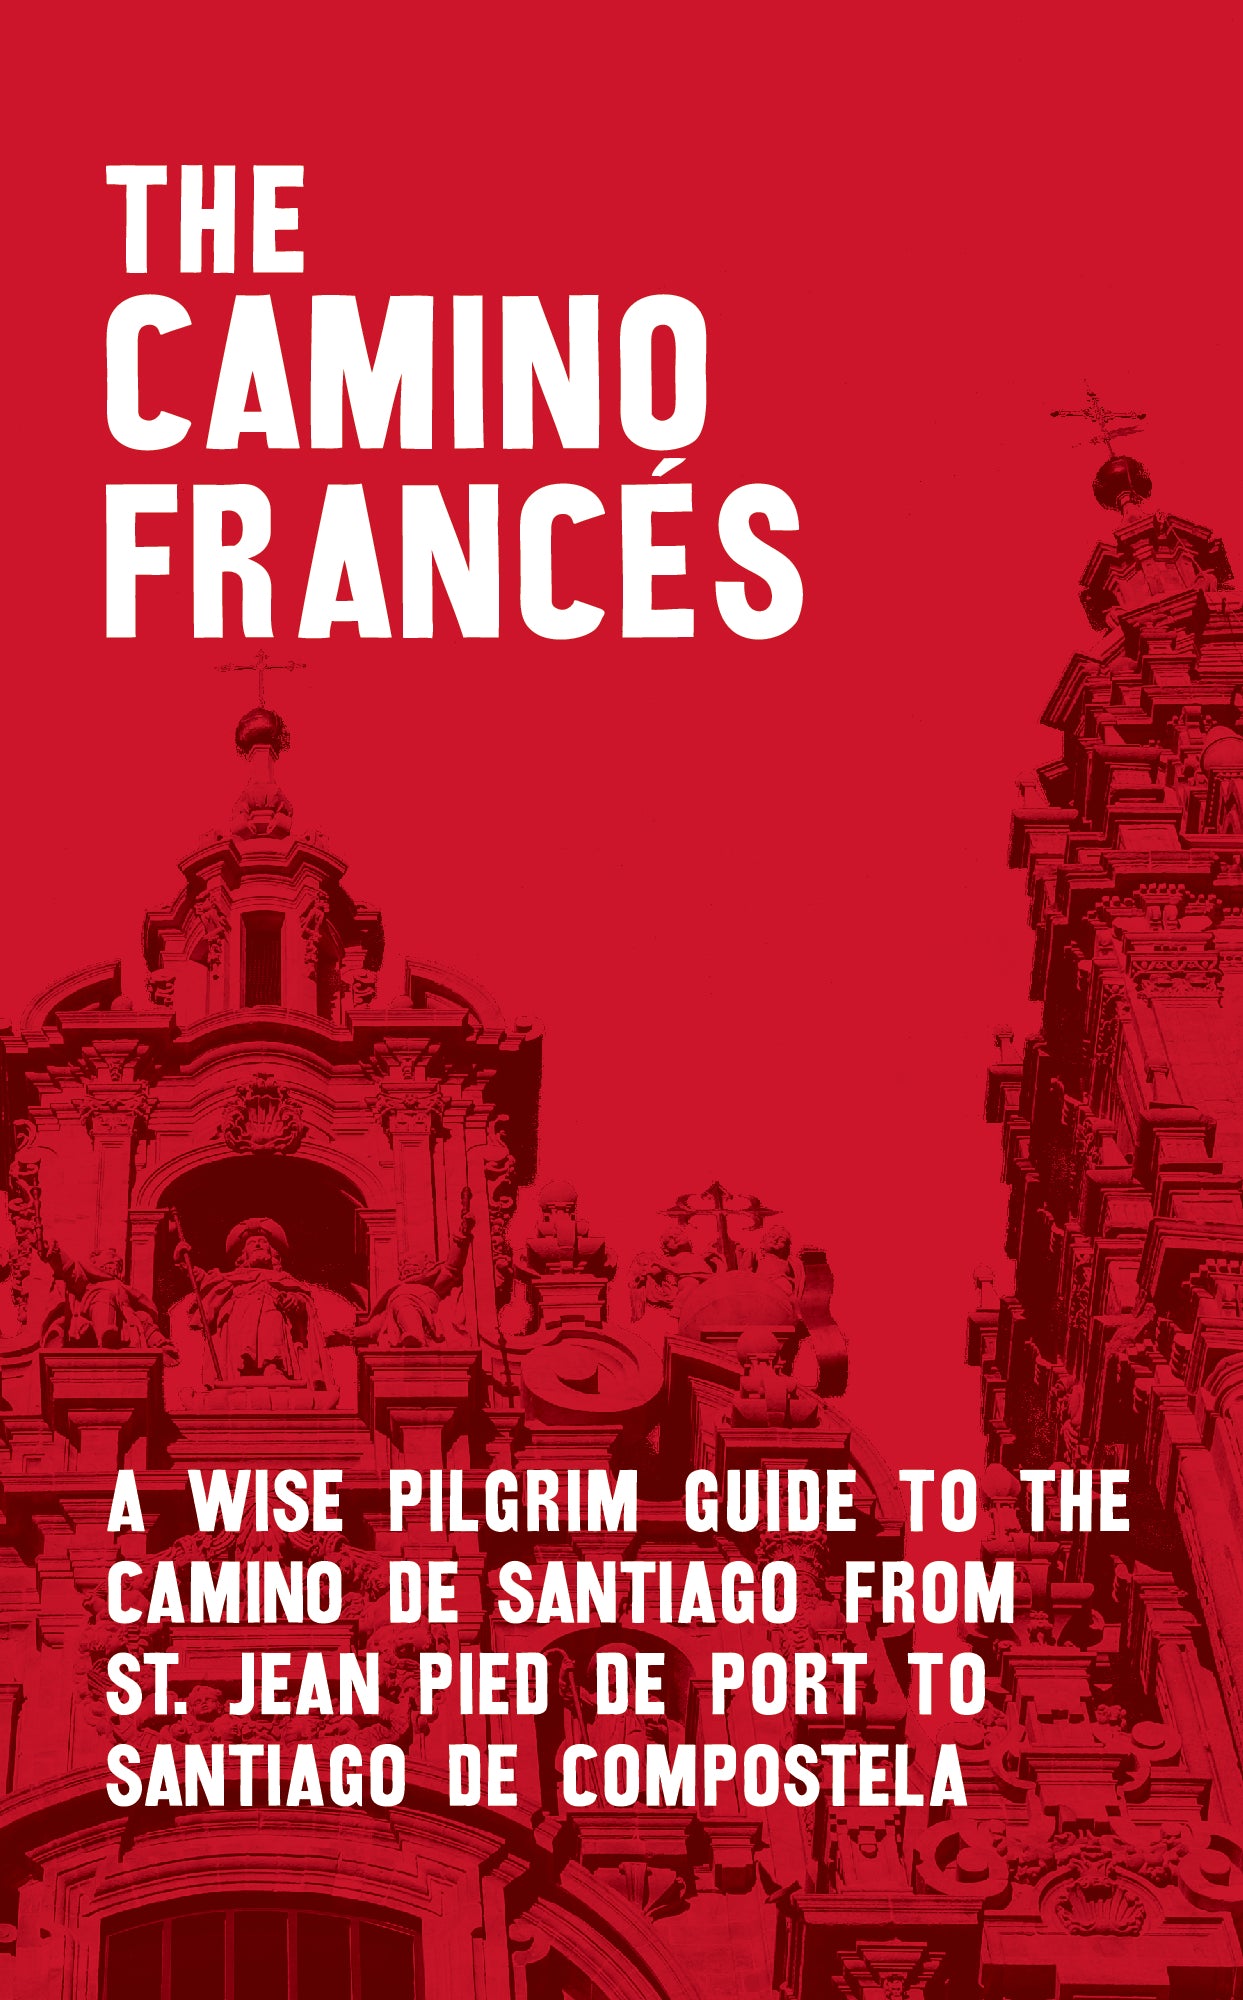 2024 edition: A Camino Francés Guide (W/FREE Passport)  (Order now, shipping late November)